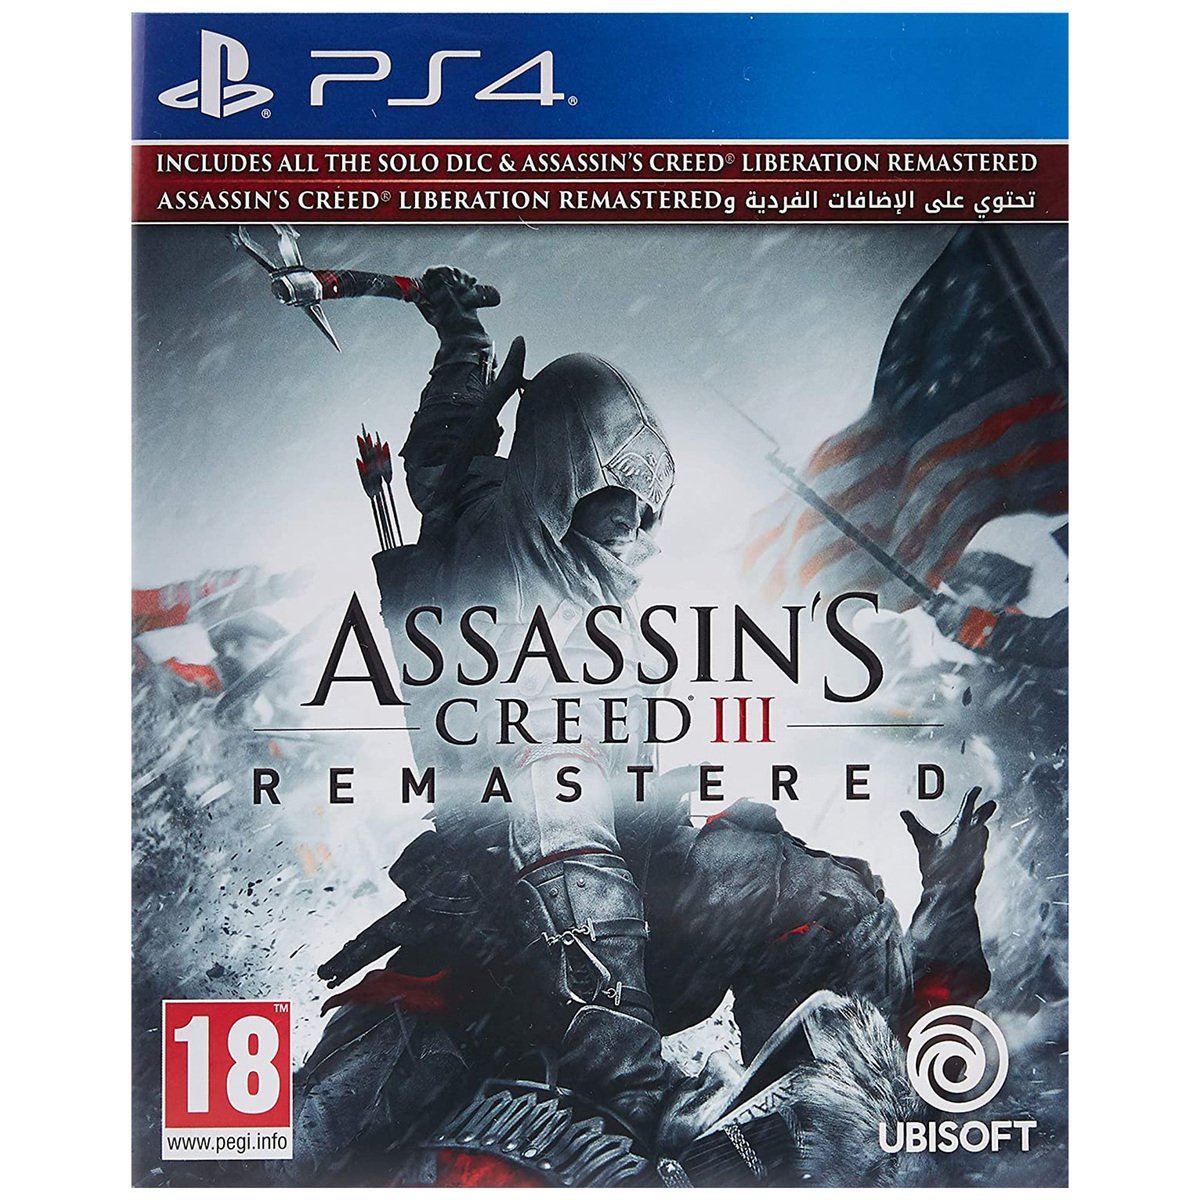 Assassins Creed-3 Remastered PS4